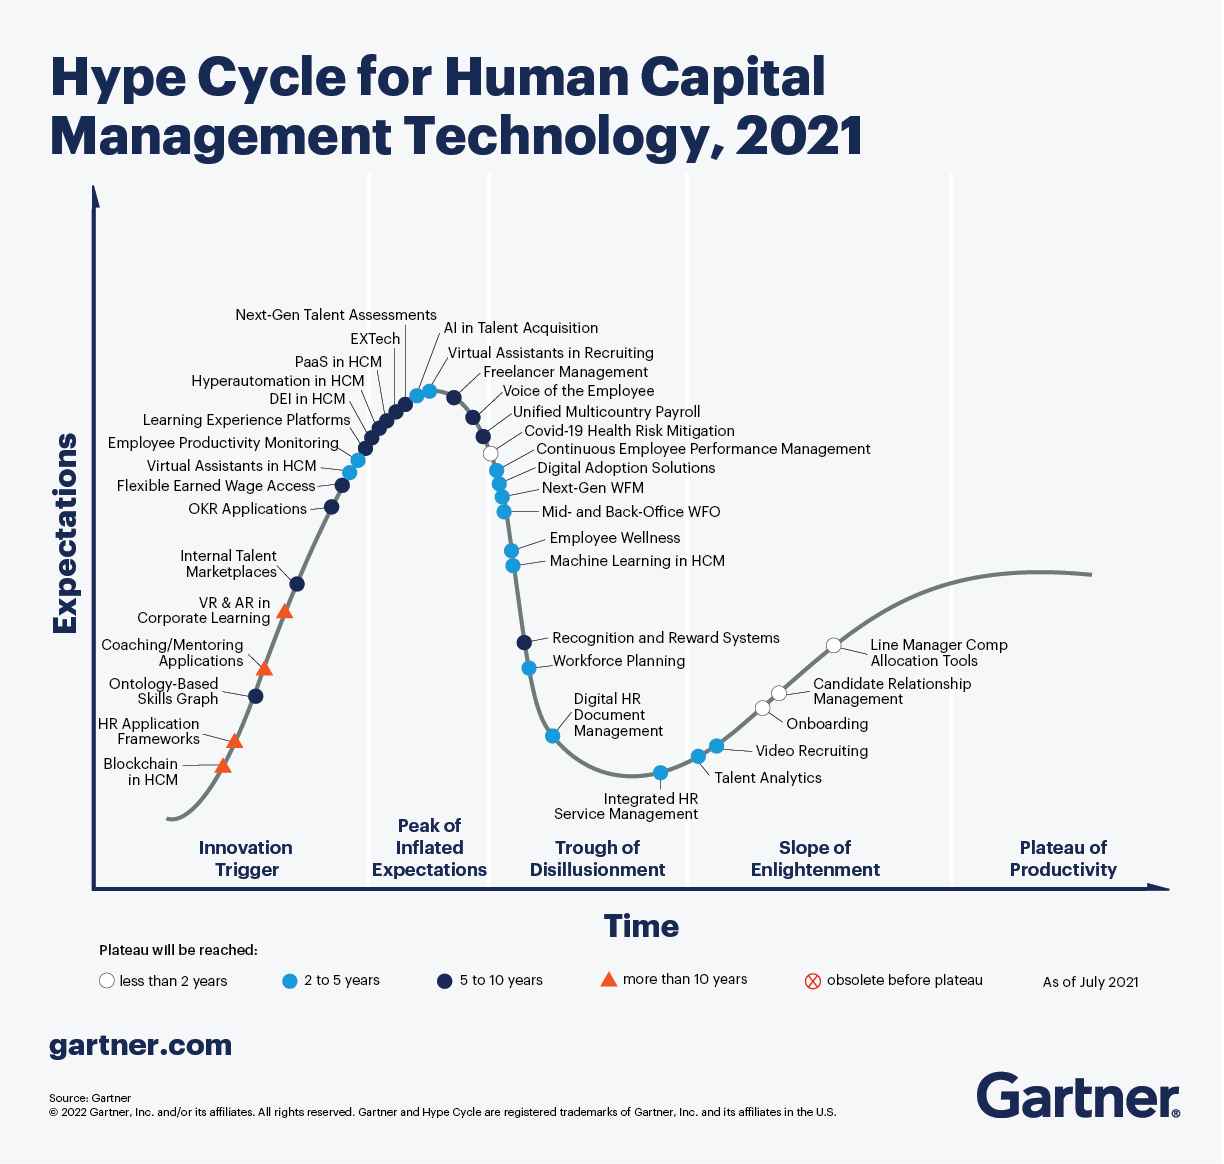 hype-cycle-for-human-capital-management-2021